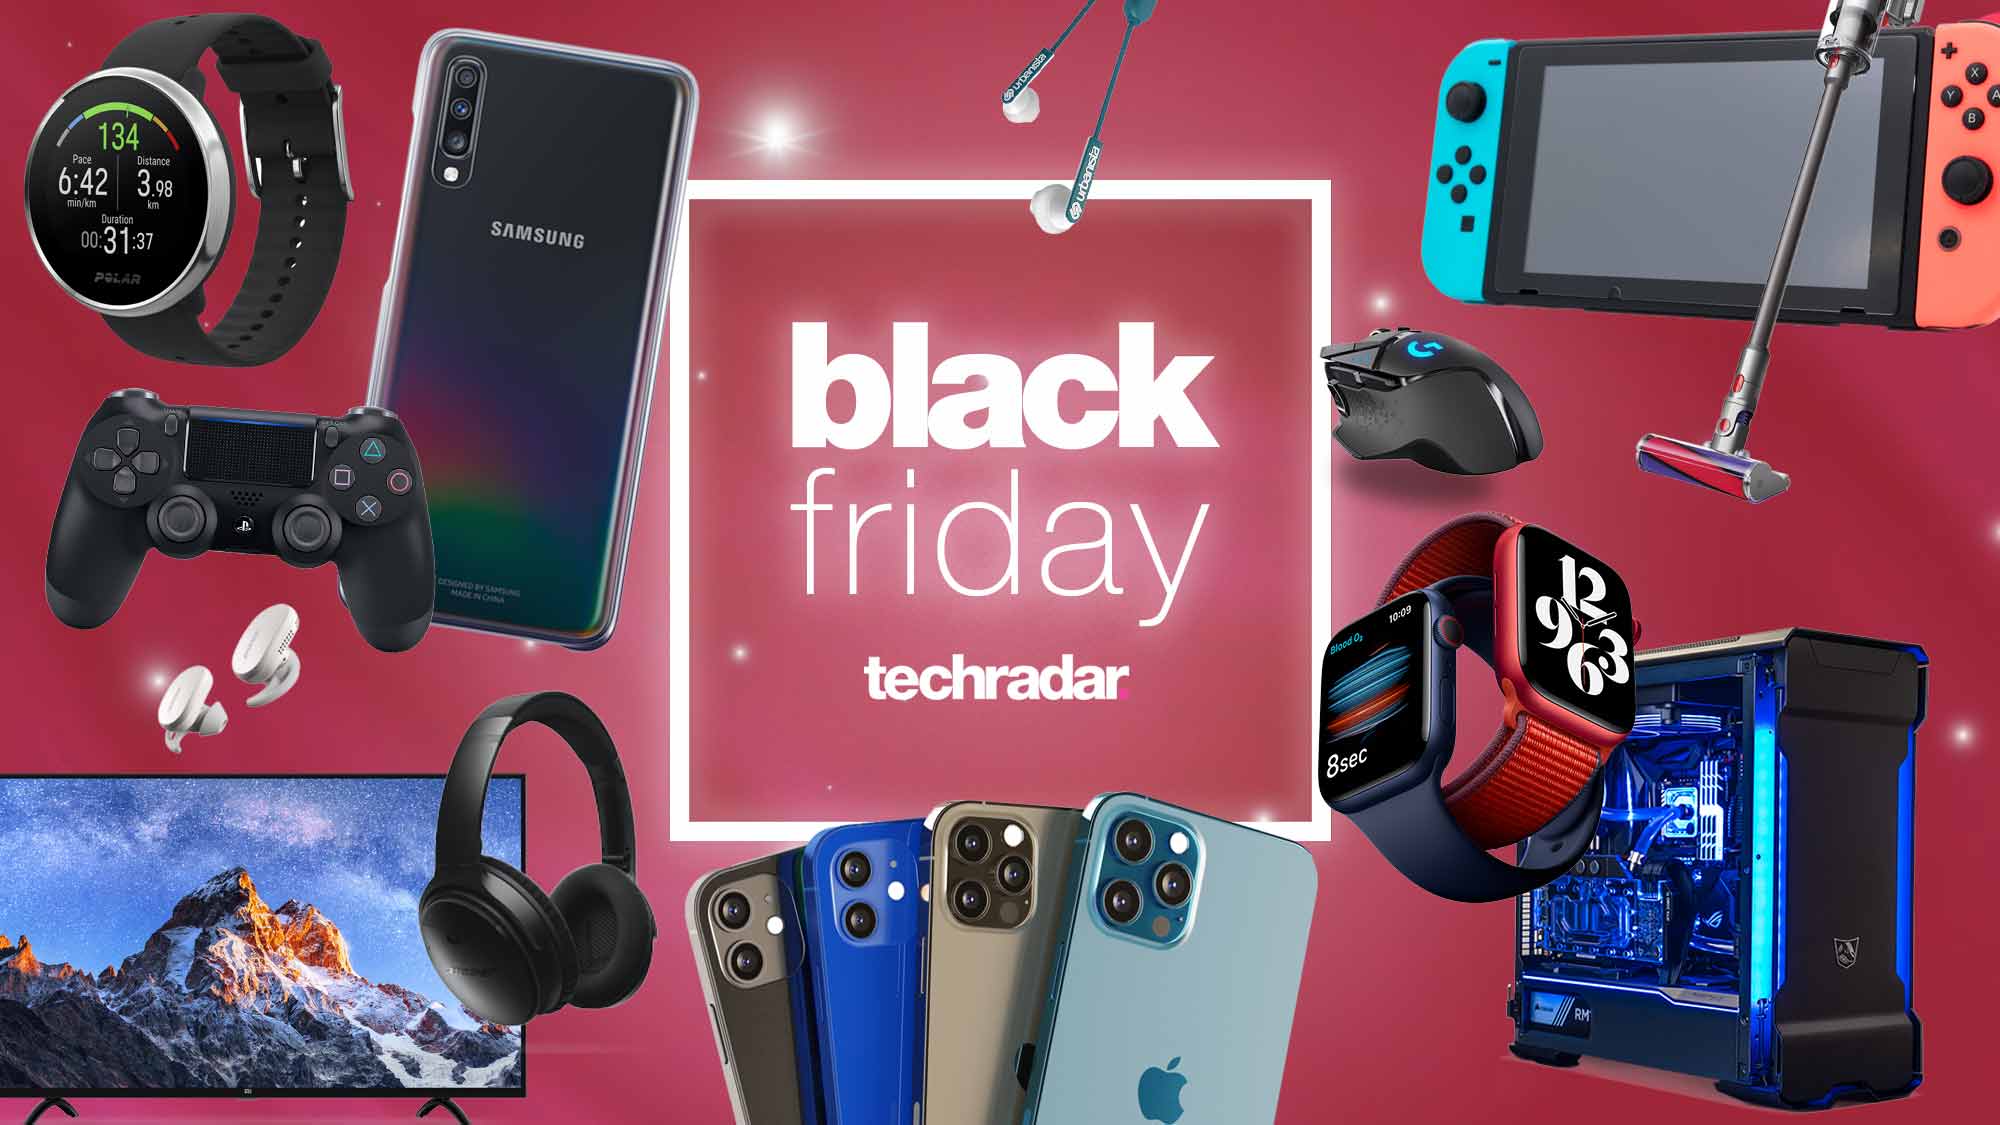 Black Friday deals text surrounded by products including a vacuum, headphones, console controller and more